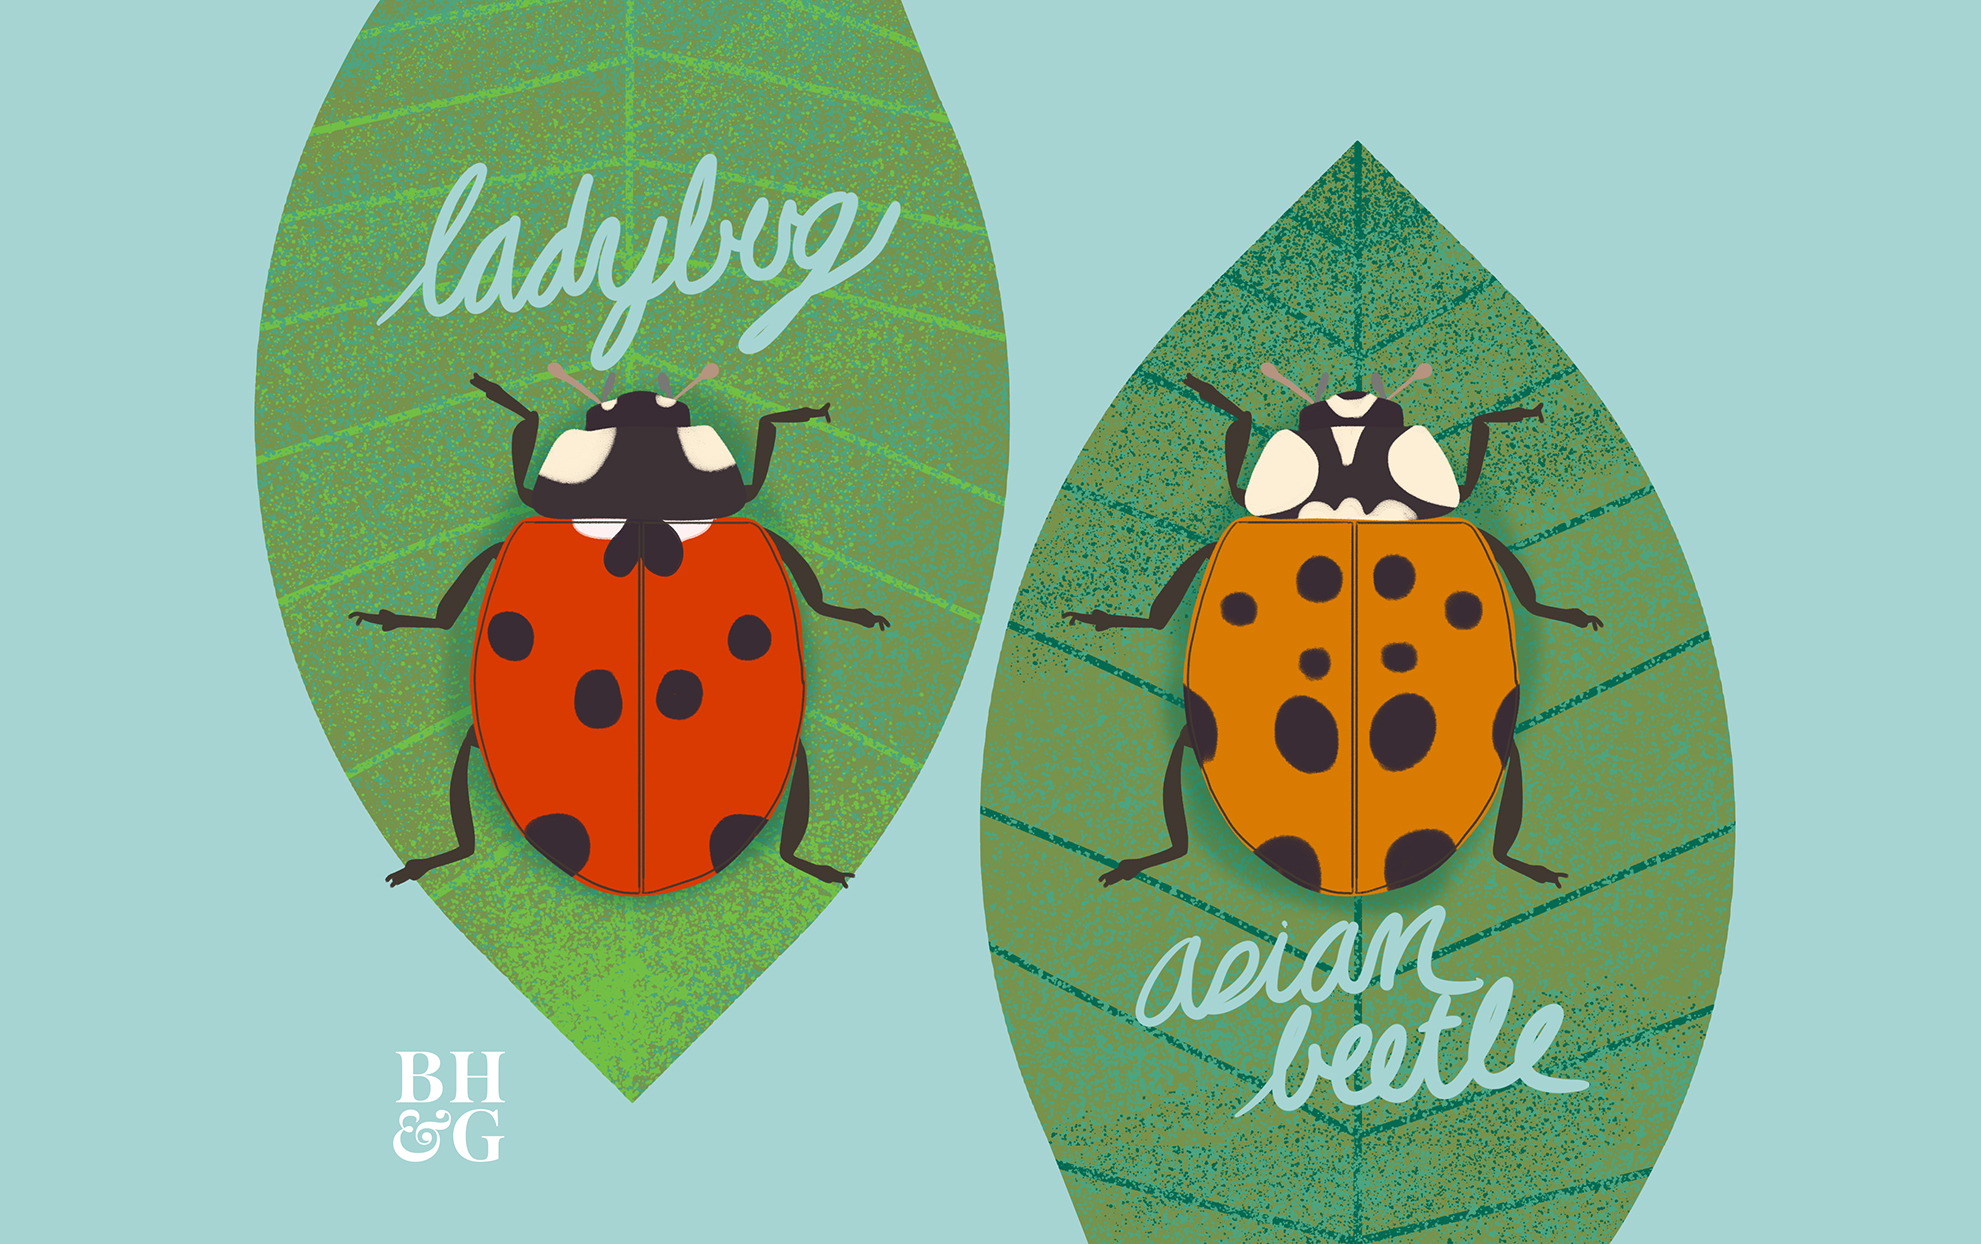 How can you tell the difference between good and bad ladybugs?